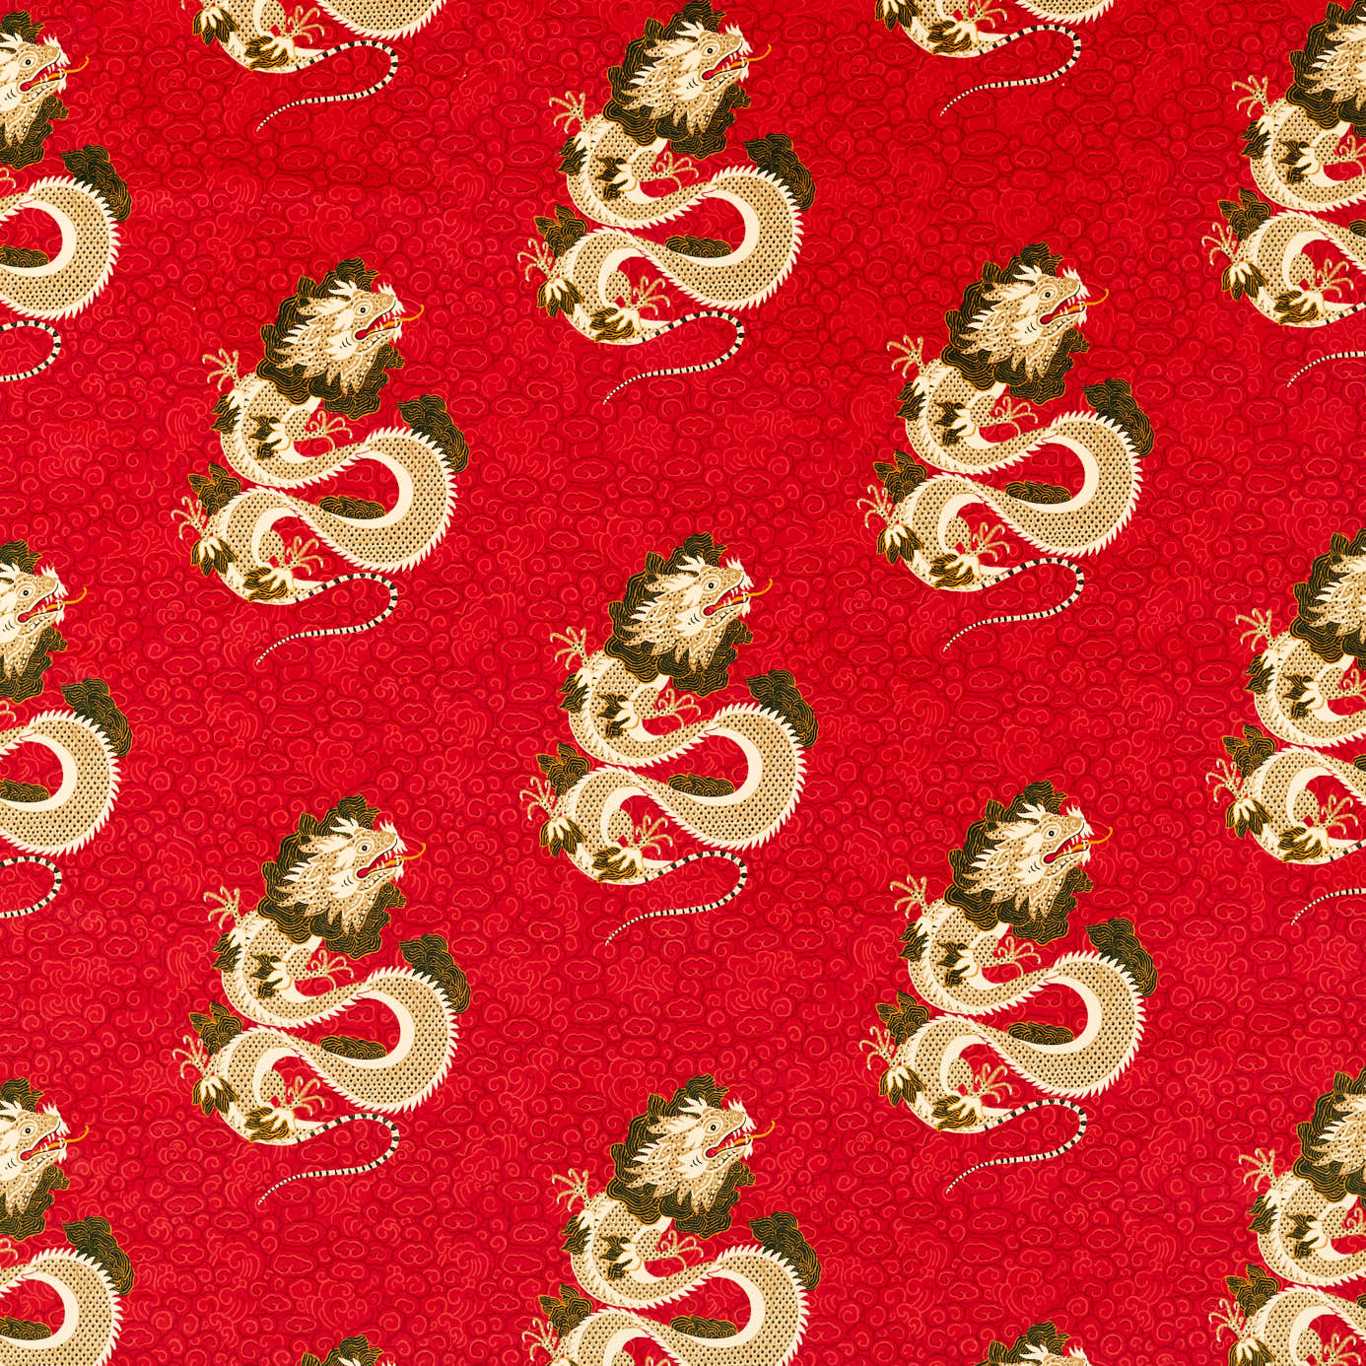 Water Dragon Fabric - Red